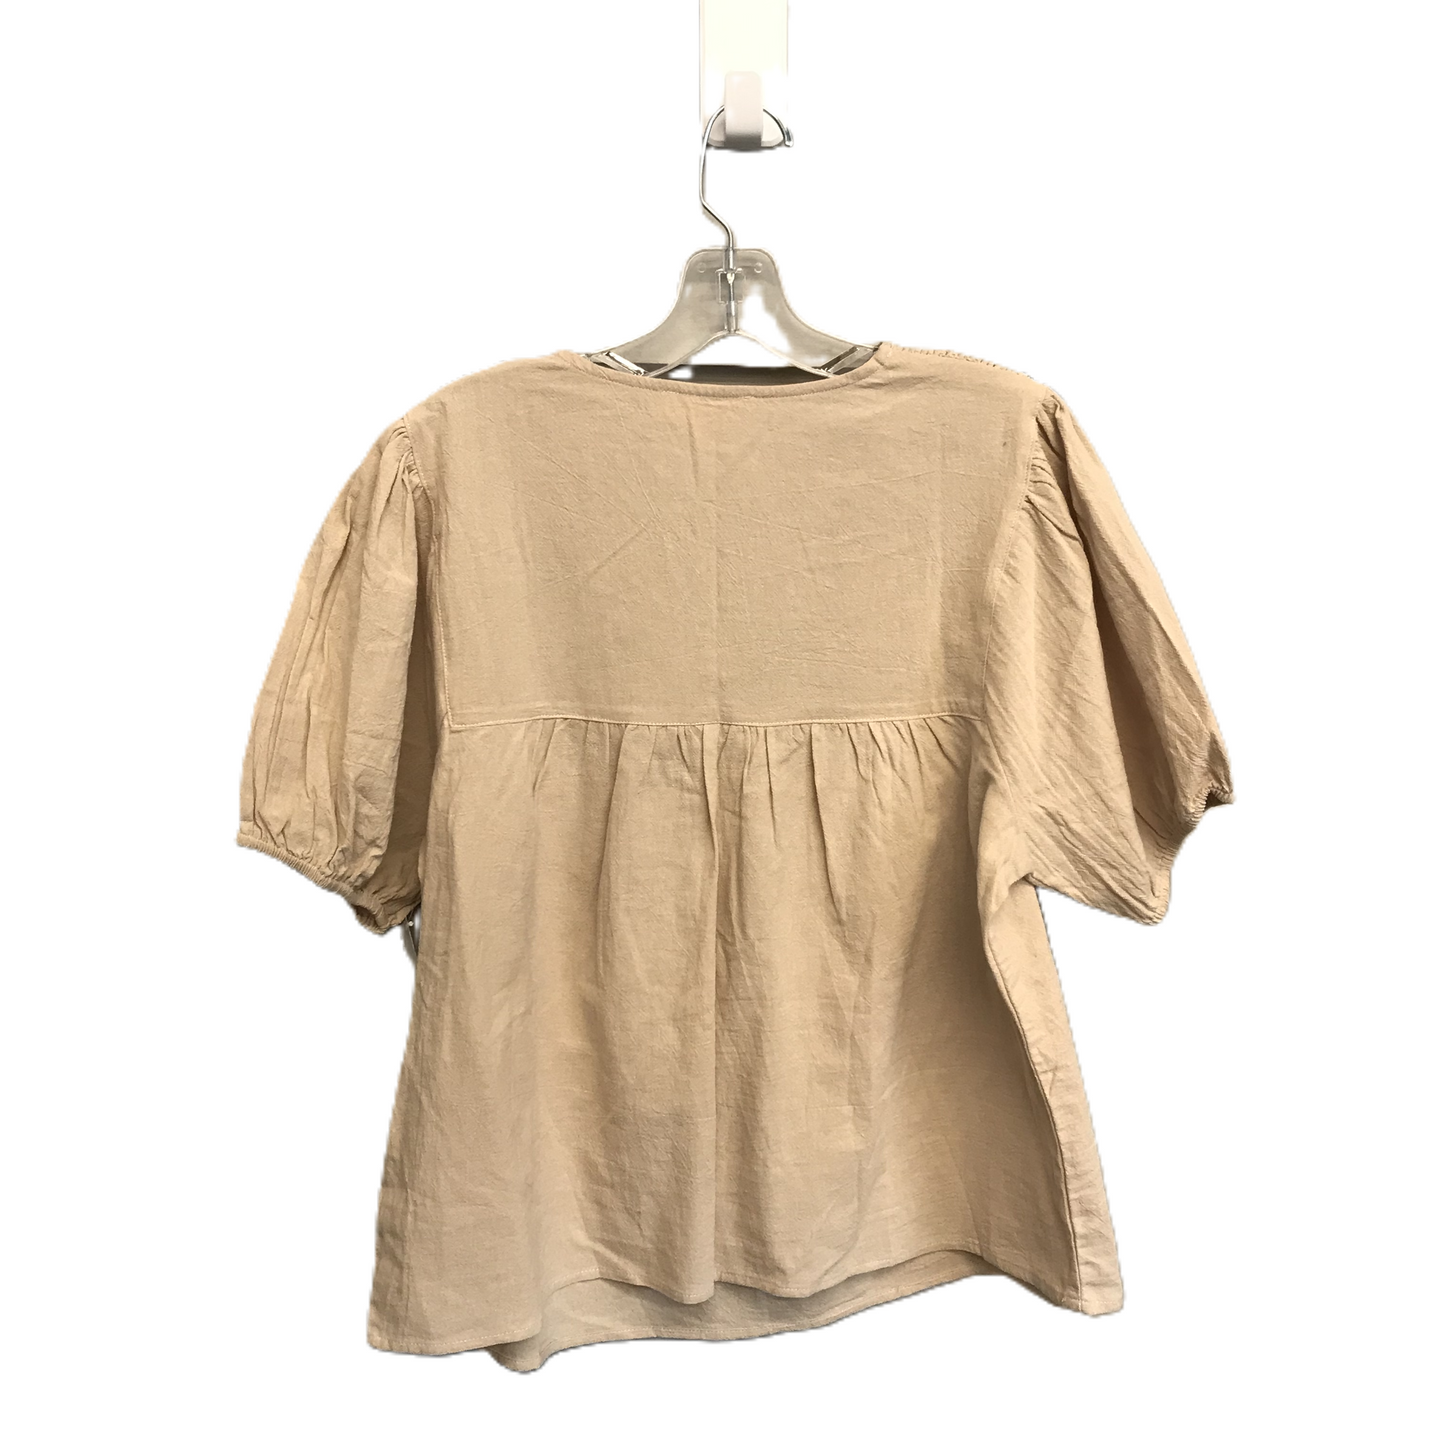 Beige Top Short Sleeve By Lovely Melody, Size: M